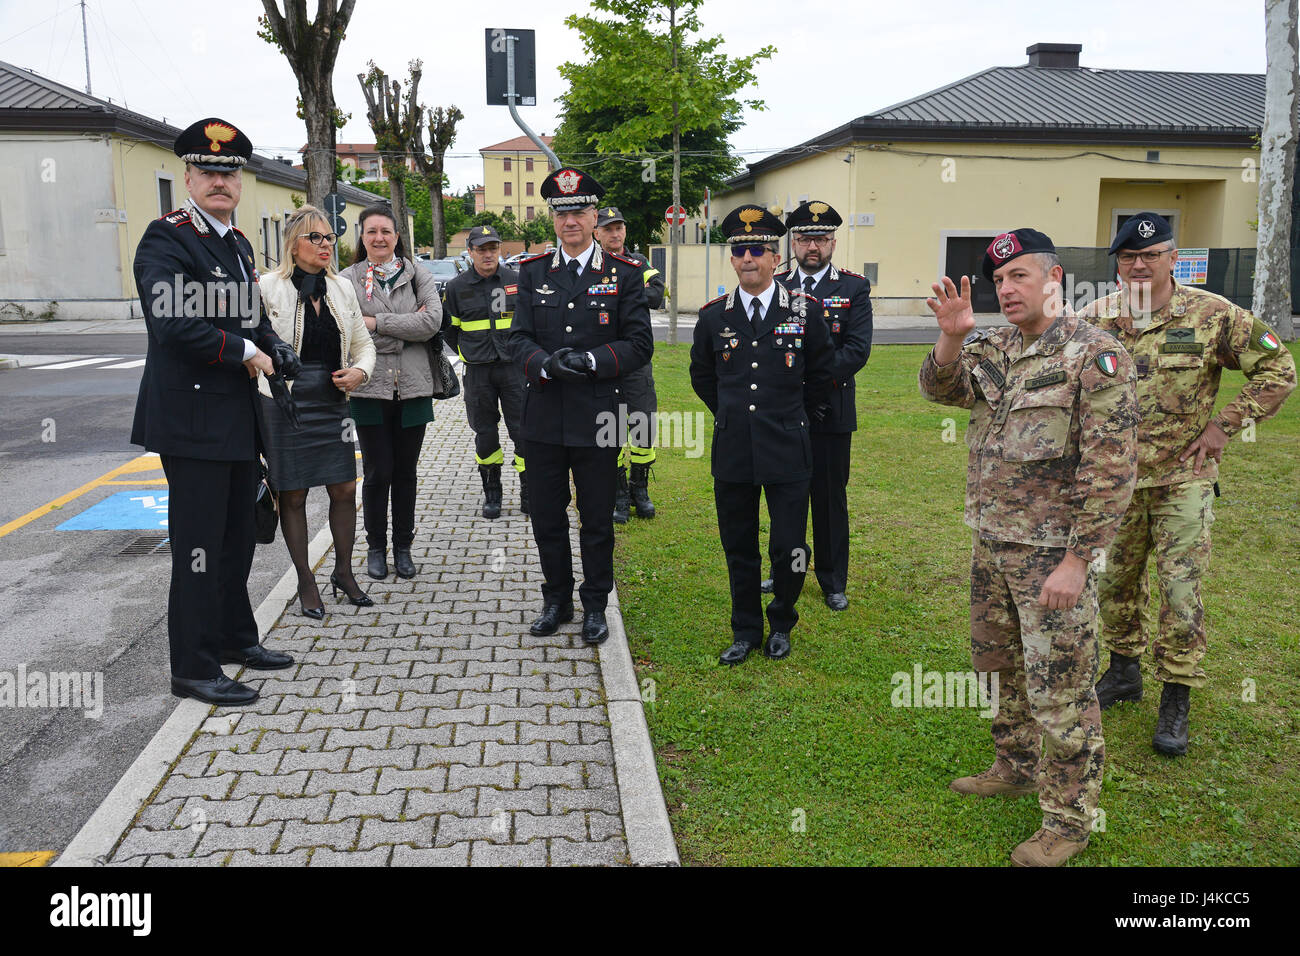 (From Right) Capt. Marco Specchia of the Italian Army, explain the exercise at the Ten. Colonel Lucio Merlo, commander Carabinieri SETAF,  Brigadier General Giuseppe La Gala commander Legione Veneto , Dott.ssa Renata Carletti Vice Prefetto di Vicenza and Colonel Alberto Santini, Commander Carabinieri Provincia Vicenza, during the Lion Response exercise, the Vicenza Military Community conducted its full-scale Lion Shake ’17 exercise on Caserma Ederle Vicenza, Italy, May 10, 2017. The purpose of the annual training exercise was to test and validate Force Protection and Emergency Management plans Stock Photo